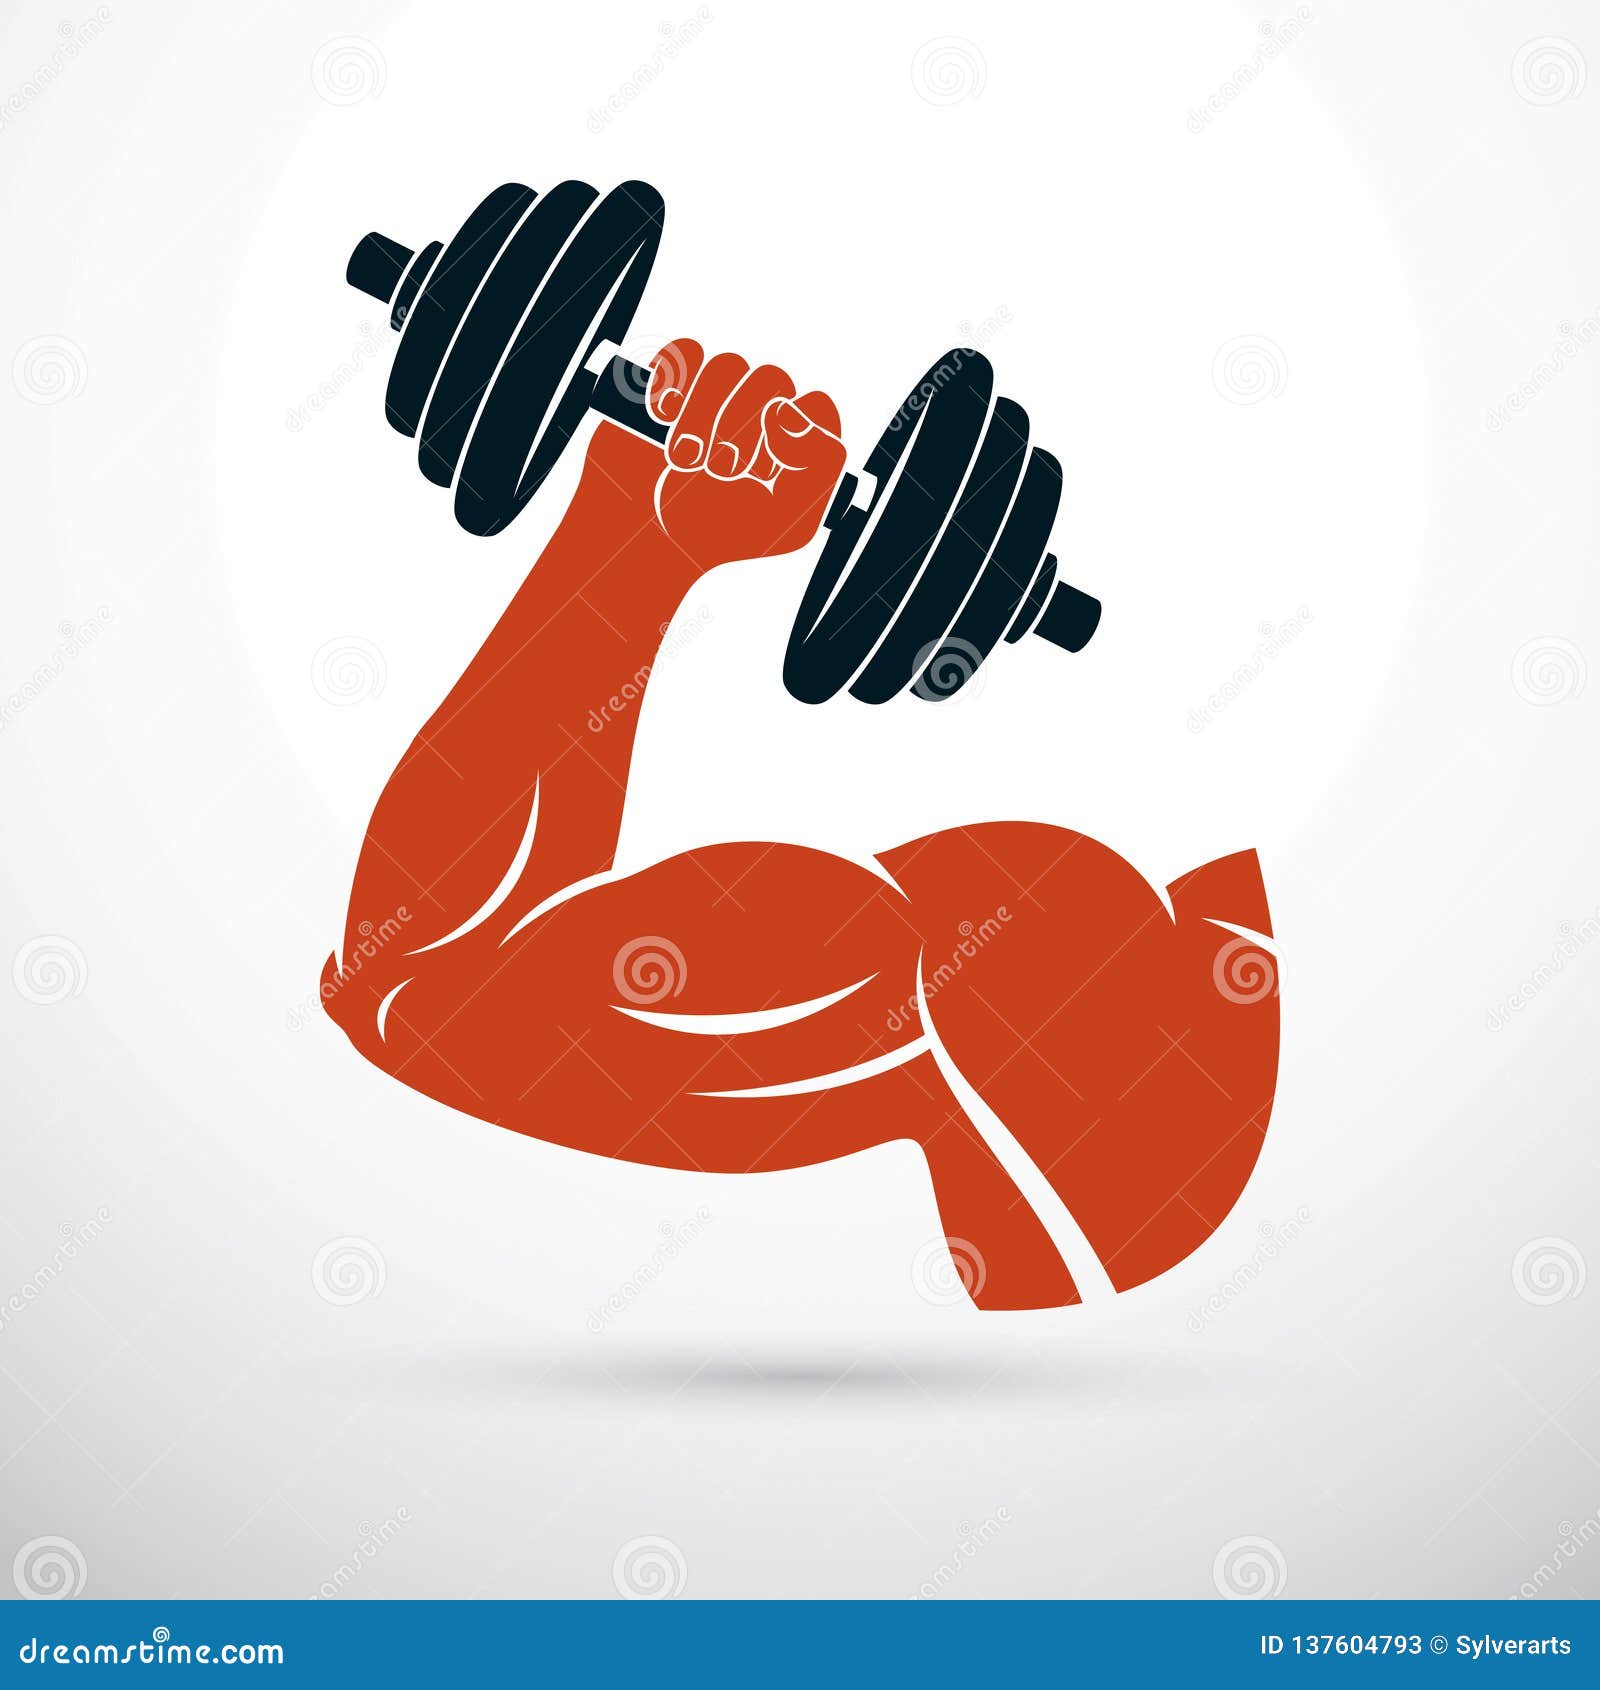 19,149 Arm Dumbbell Workout Illustration Images, Stock Photos, 3D objects,  & Vectors